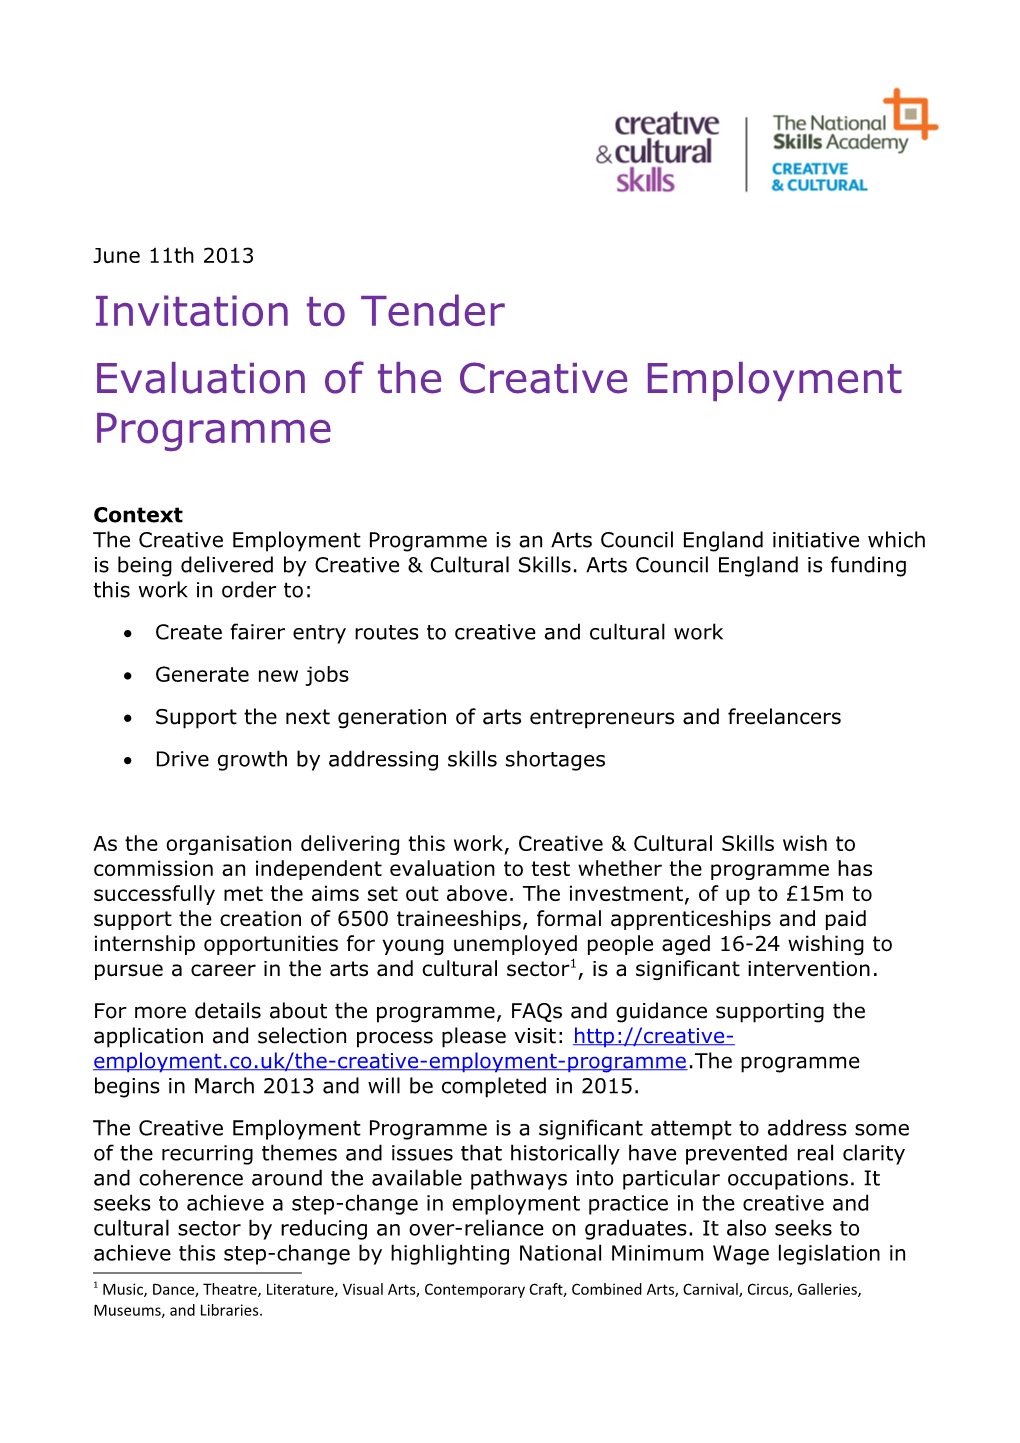 Evaluation of the Creative Employment Programme